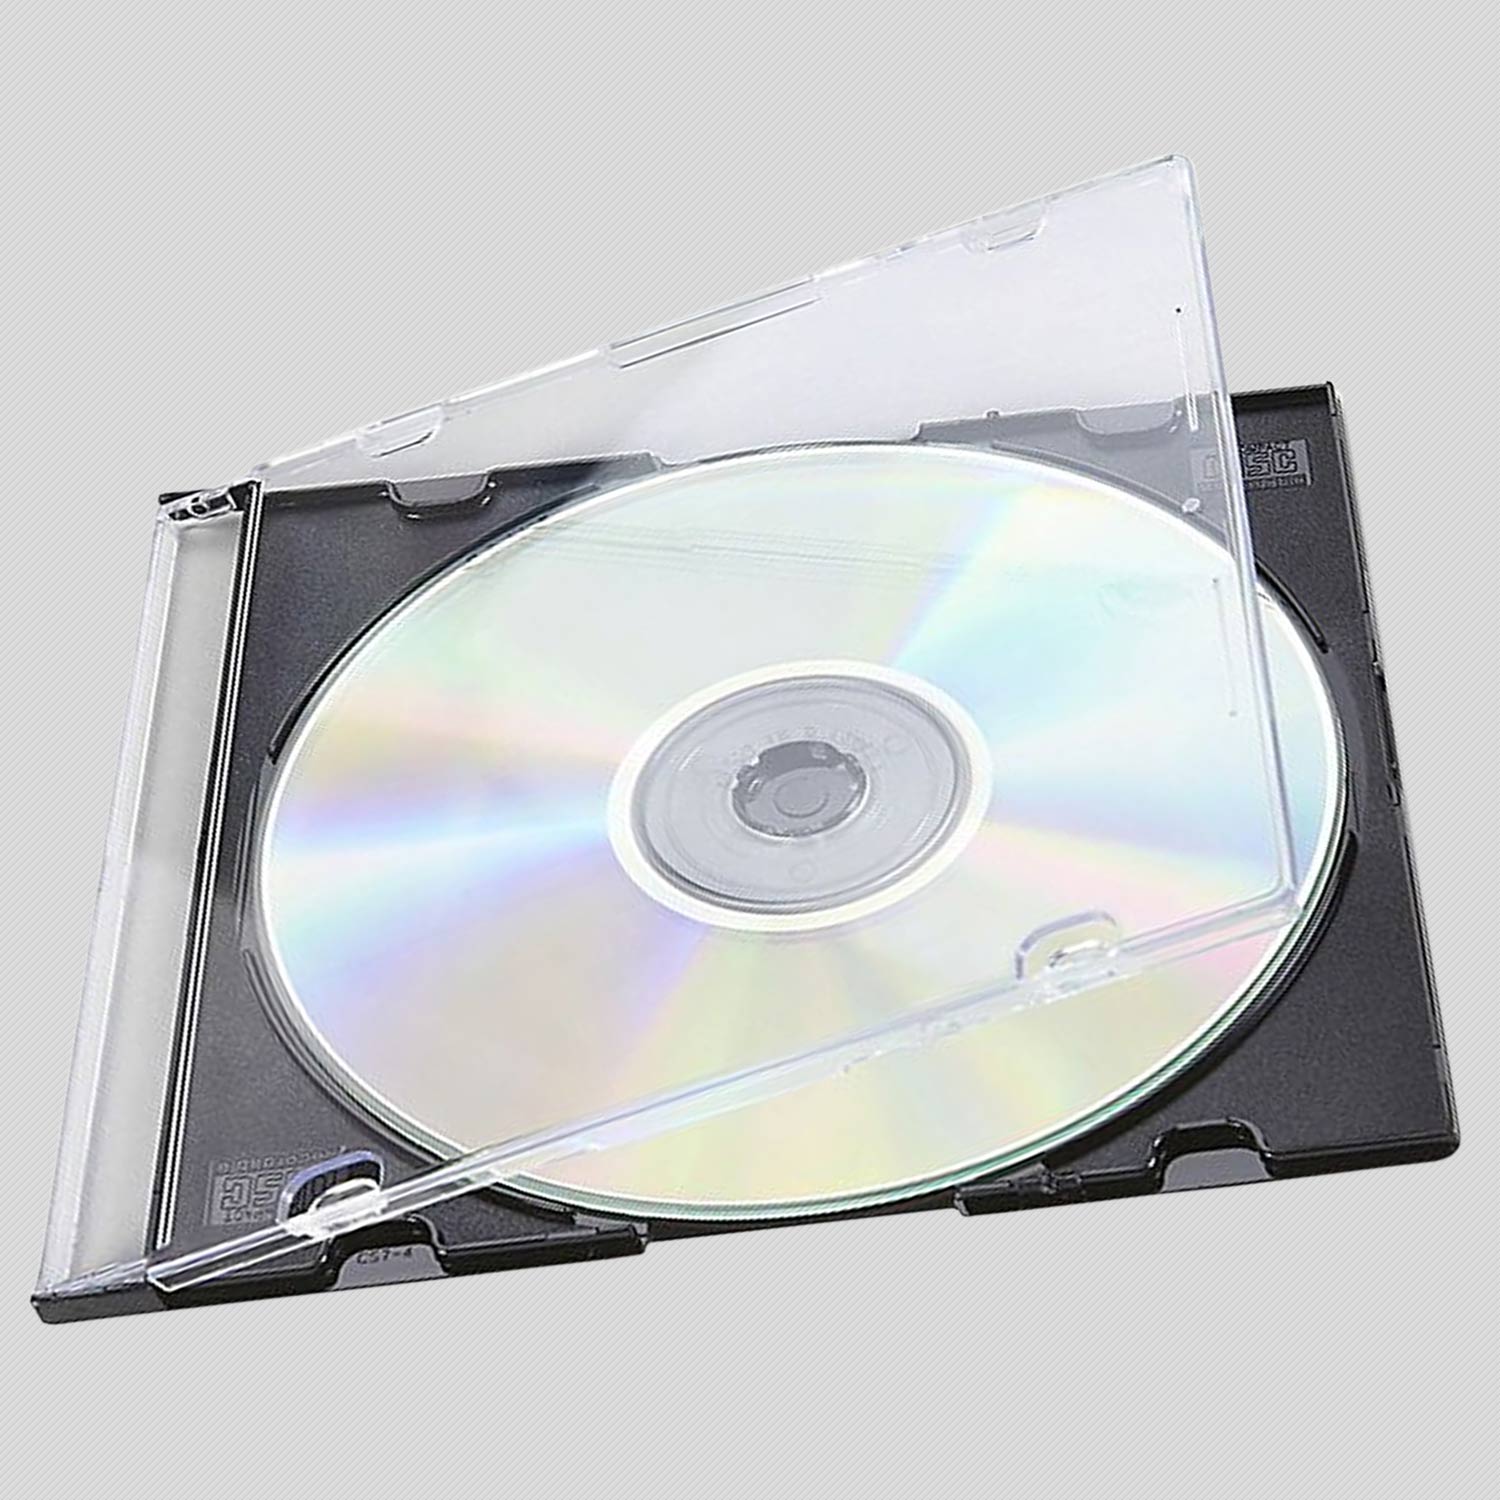 Type the cd key displayed on the half life cd case фото 46